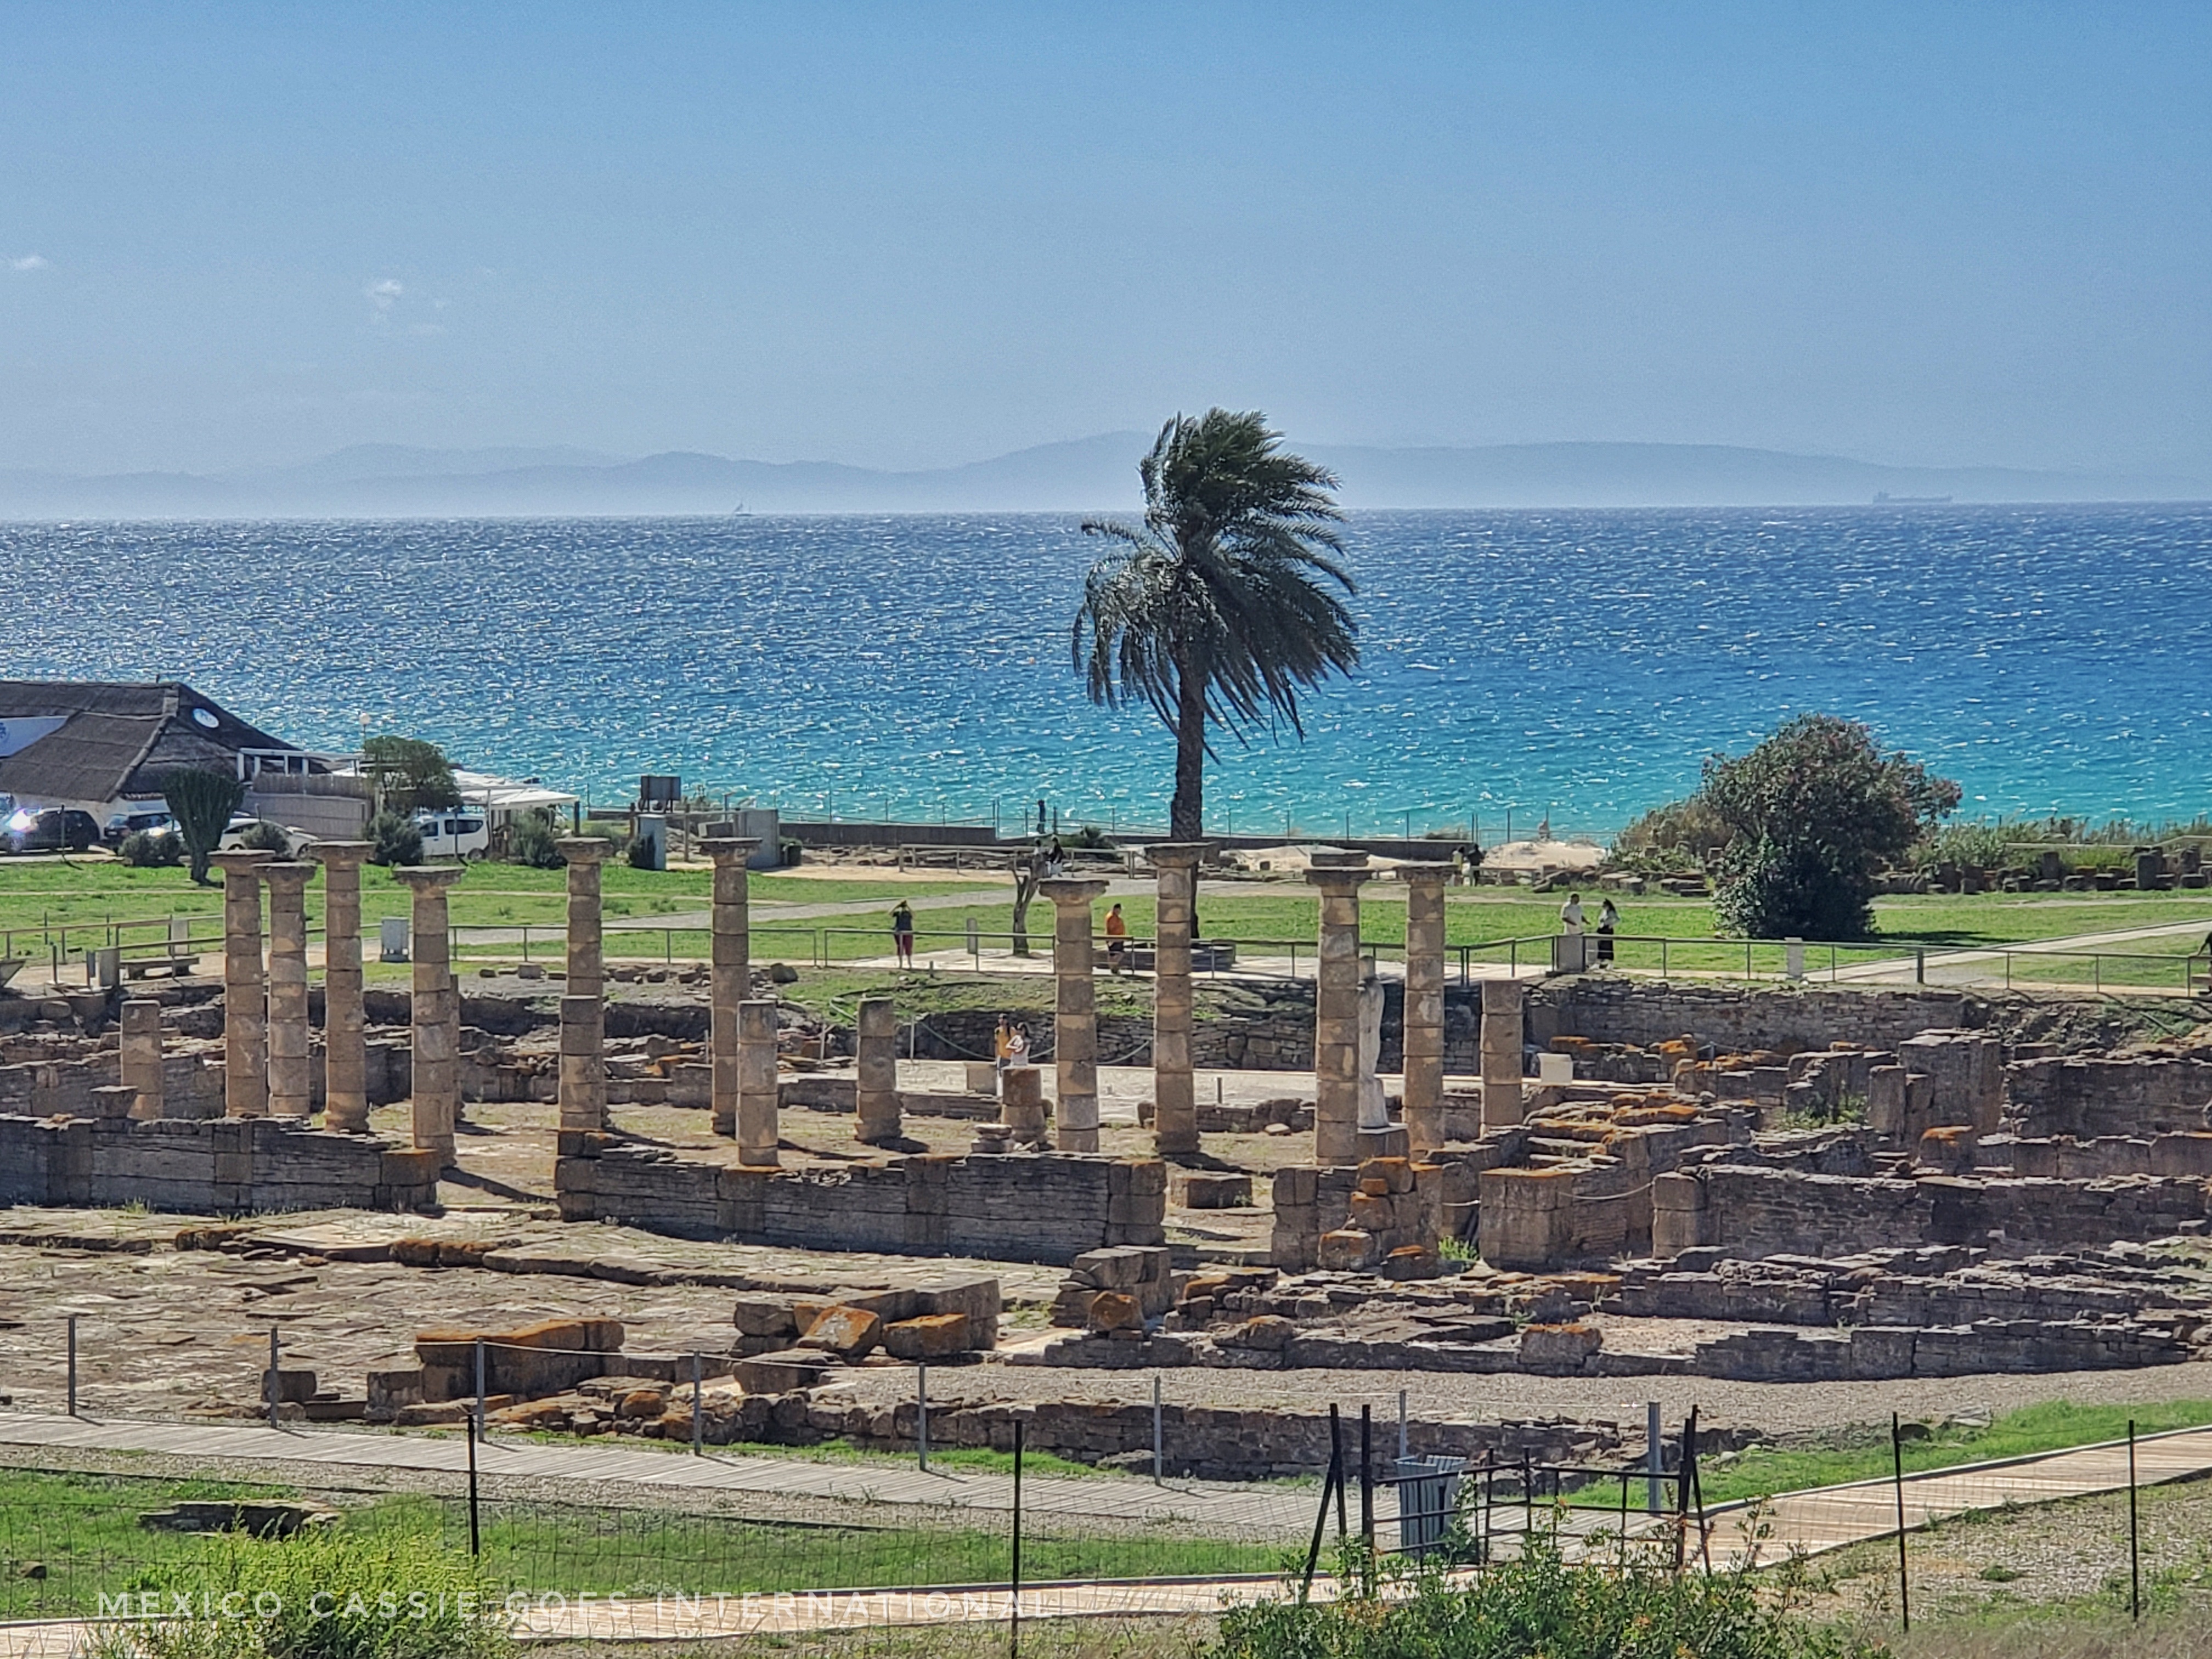 view of roman ruins (columns) in front of very blue ocean